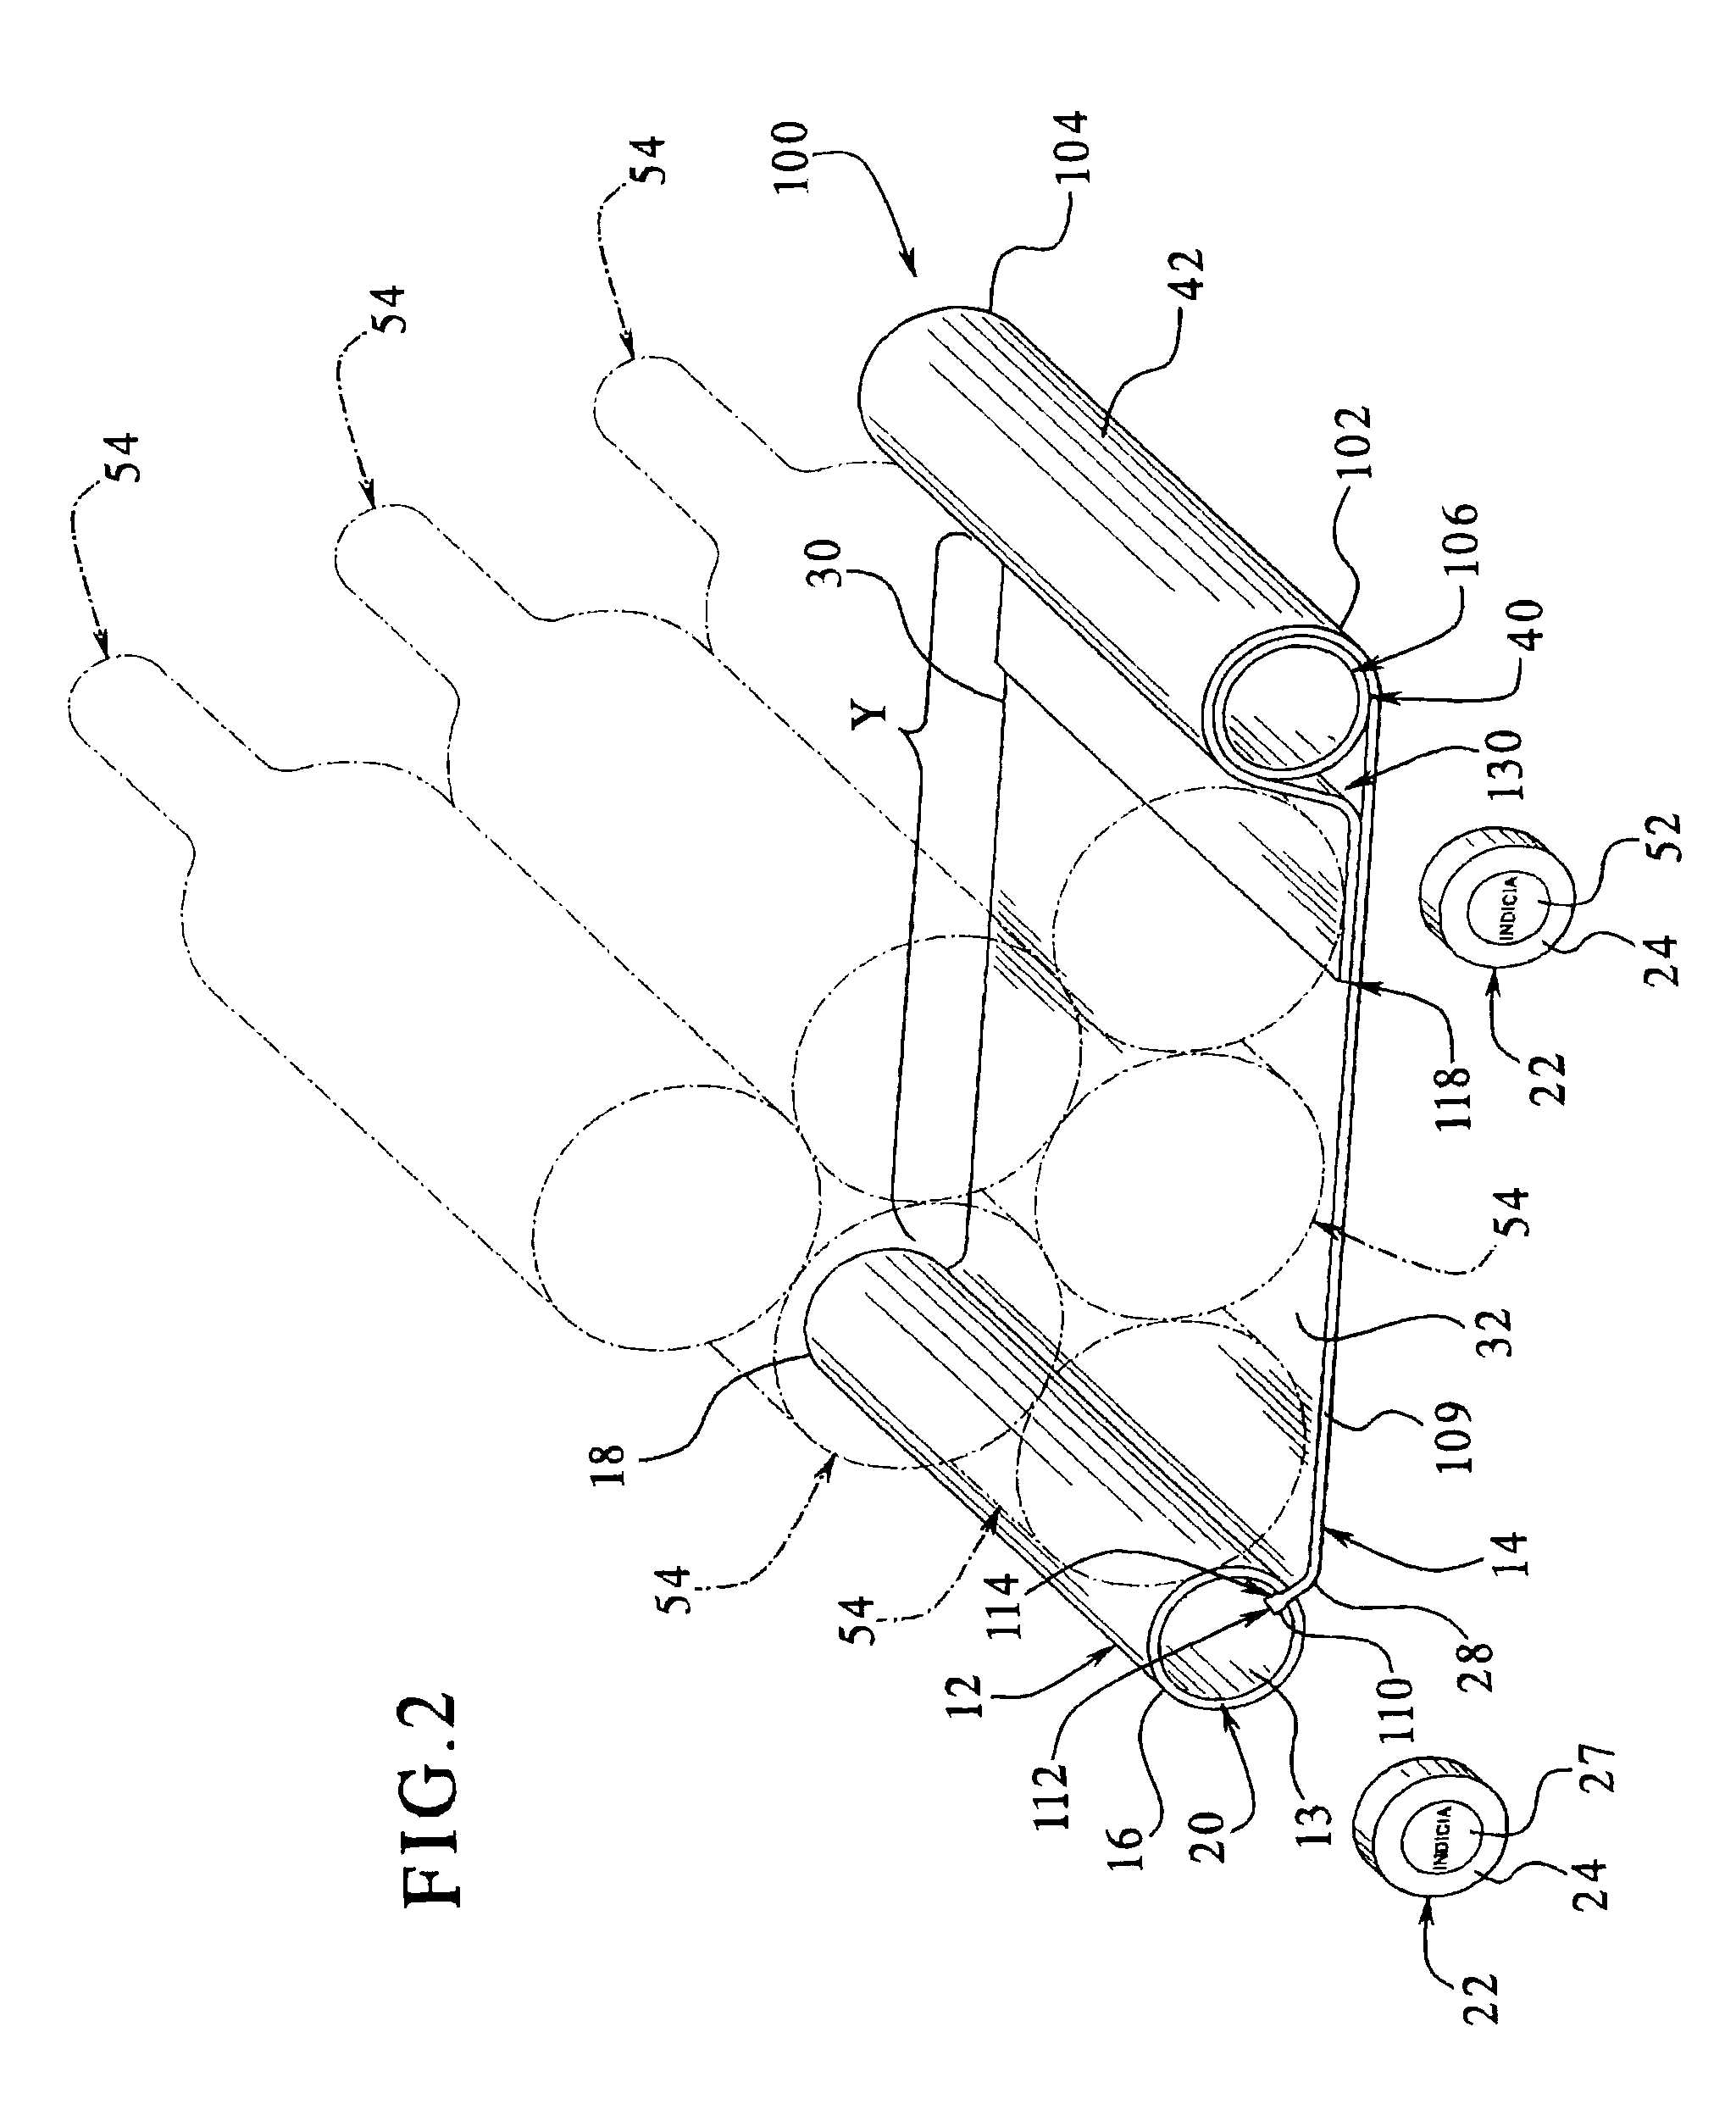 Container holder and a system for supporting containers and a method for holding containers